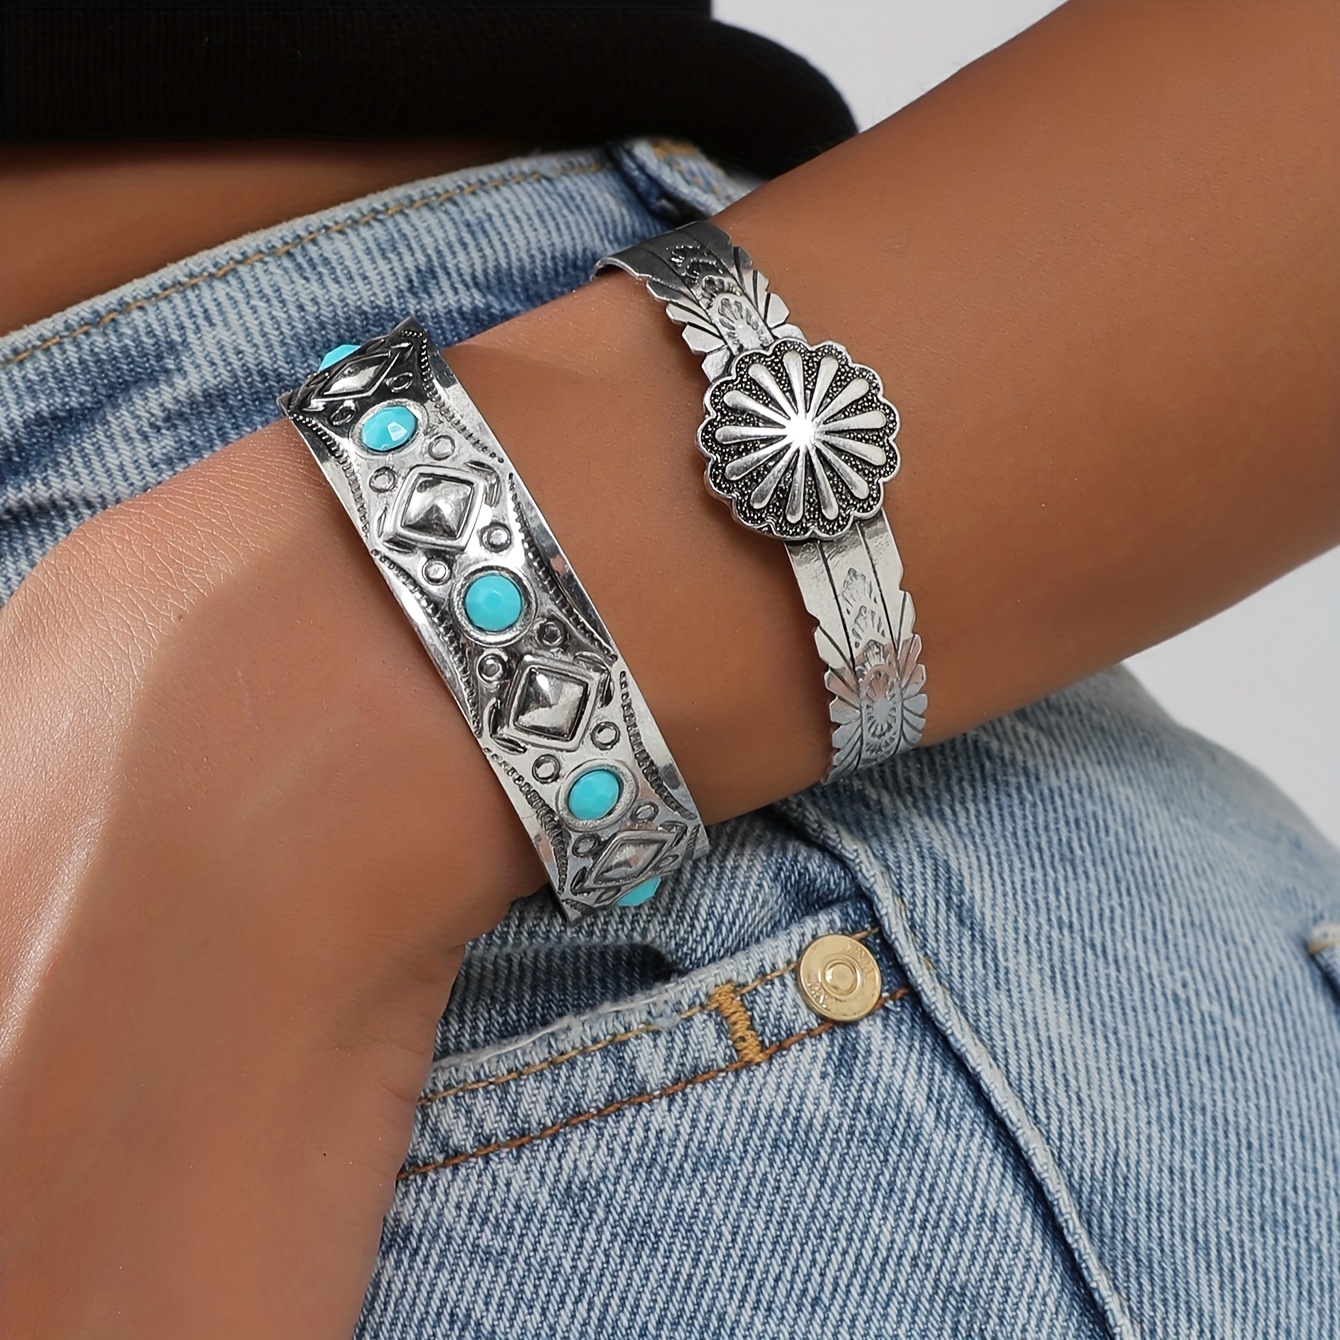 

2pcs/set Western Boho Style Silver Color Cuff Bangle Bracelet Inlaid Turquoise Bohemian Jewelry For Women